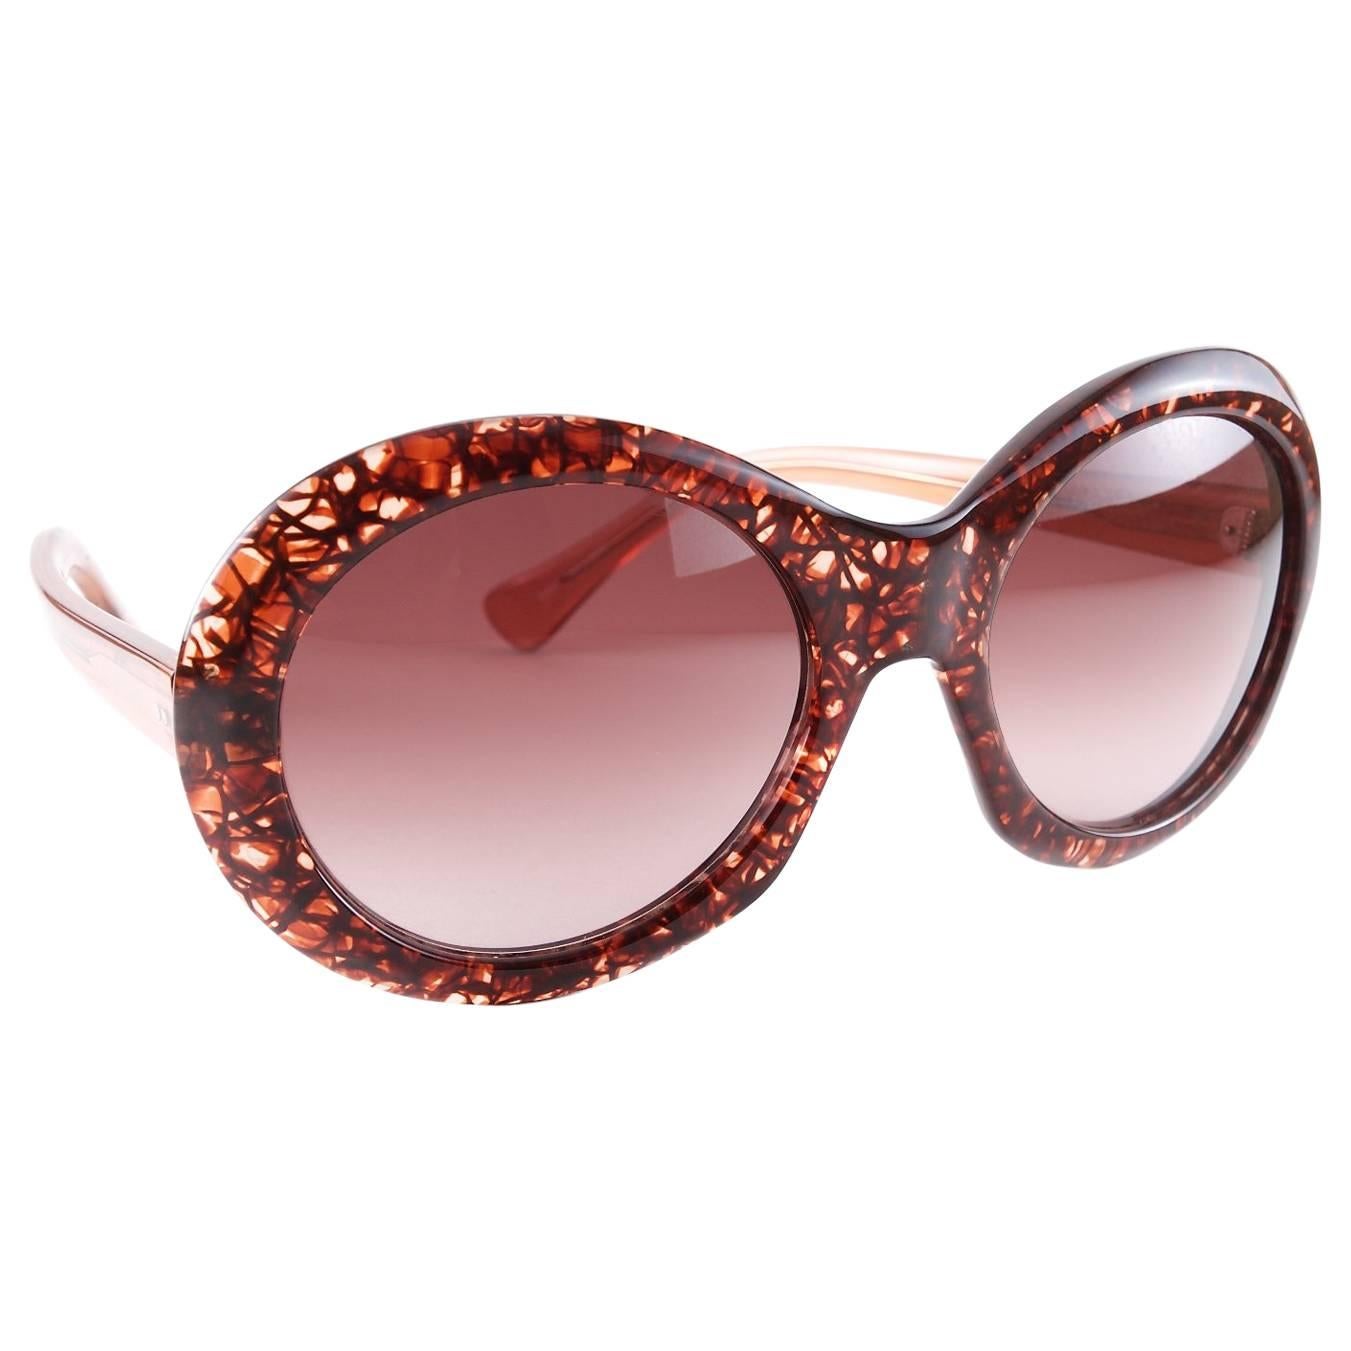 Oliver Goldsmith Audrey Sunglasses - Made in Japan For Sale